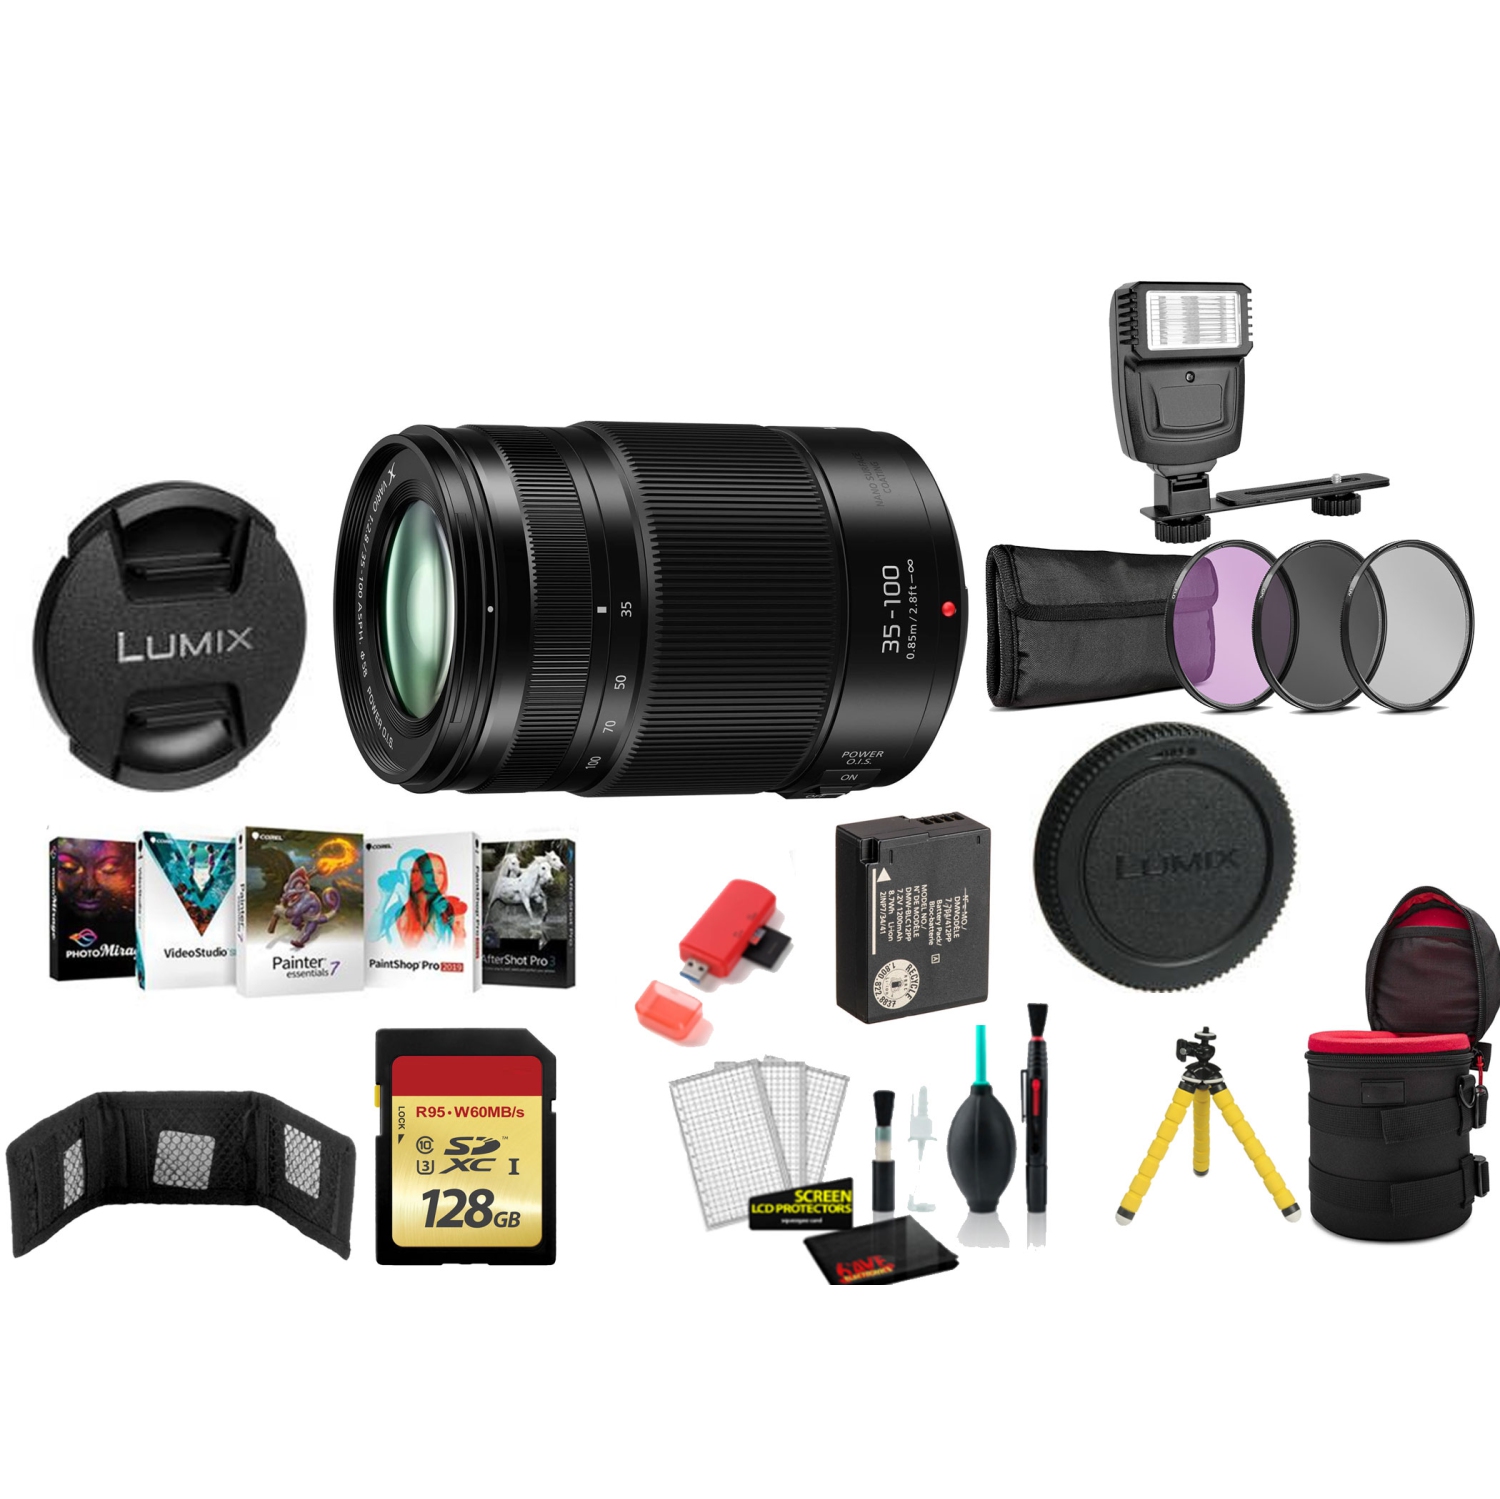 Panasonic Lumix G X Vario 35-100mm f/2.8 II POWER O.I.S. Lens with 128GB Memory Card and More